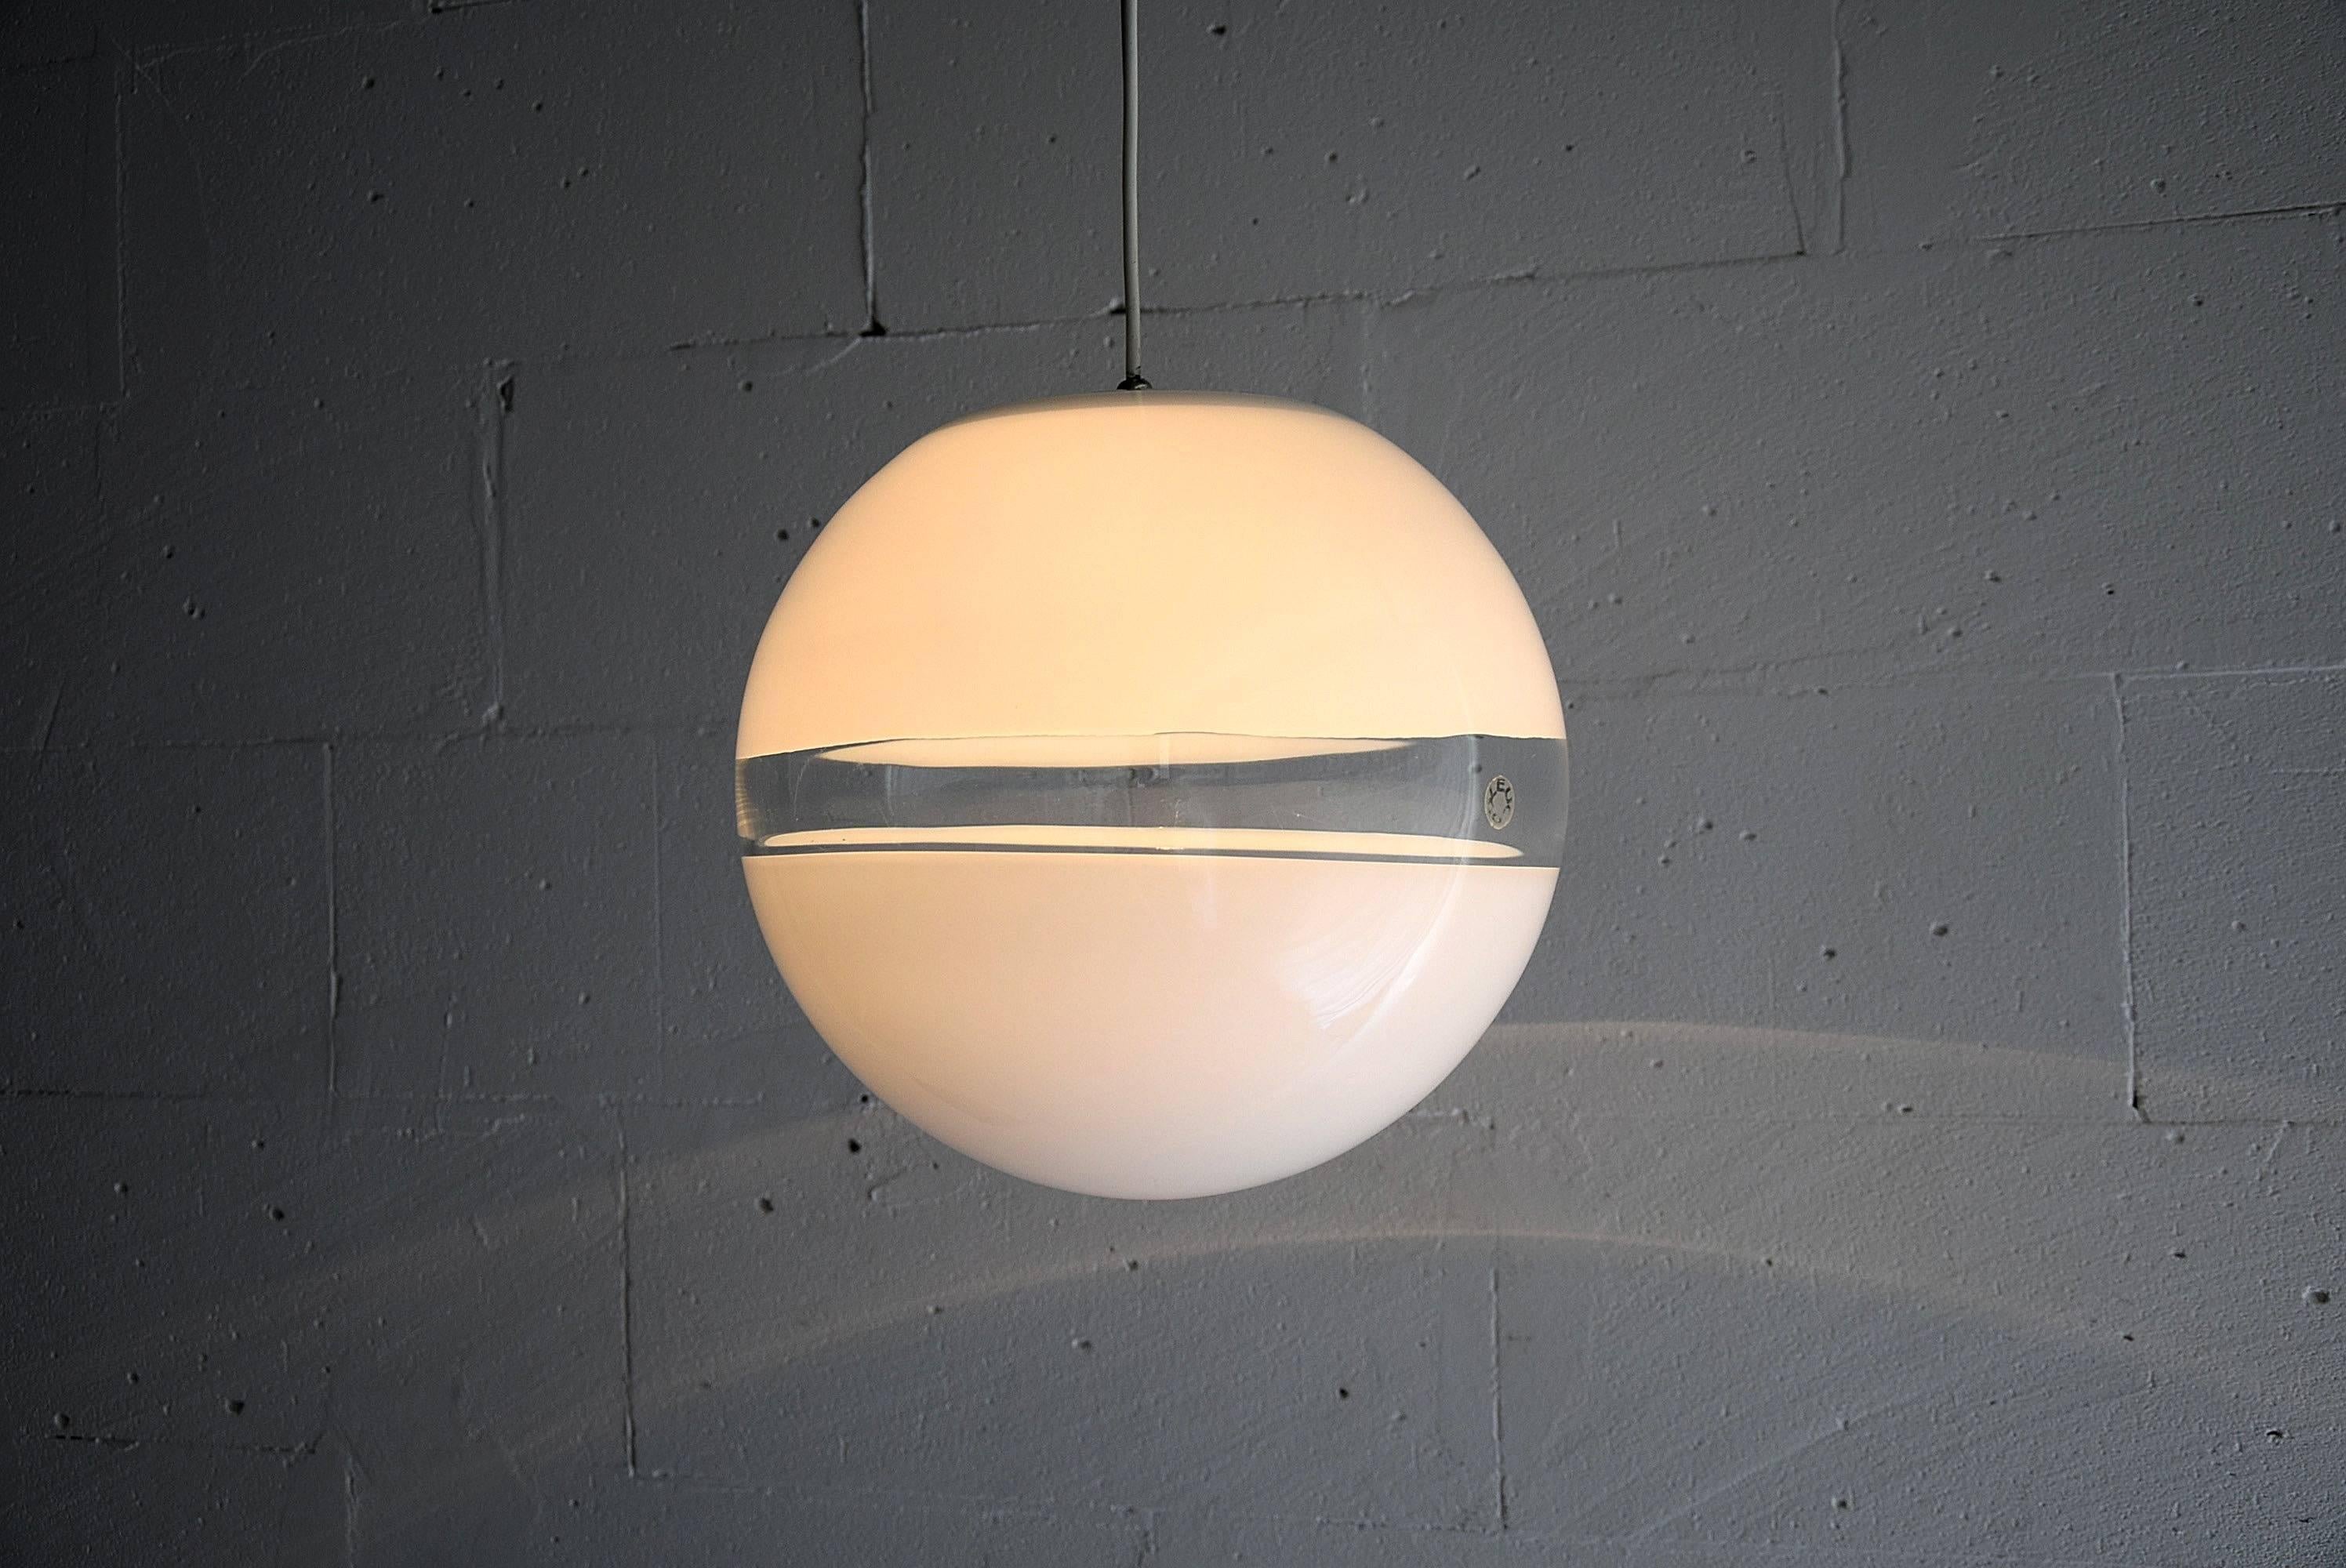 Leucos 1970s handblown in Murano, Venice, Italy. An intriguing white and transparent sphere of which the lower half seems to float in space.

The lamp is in fantastic condition.

Lamp will be shipped abroad in a custom made wooden crate. Cost of